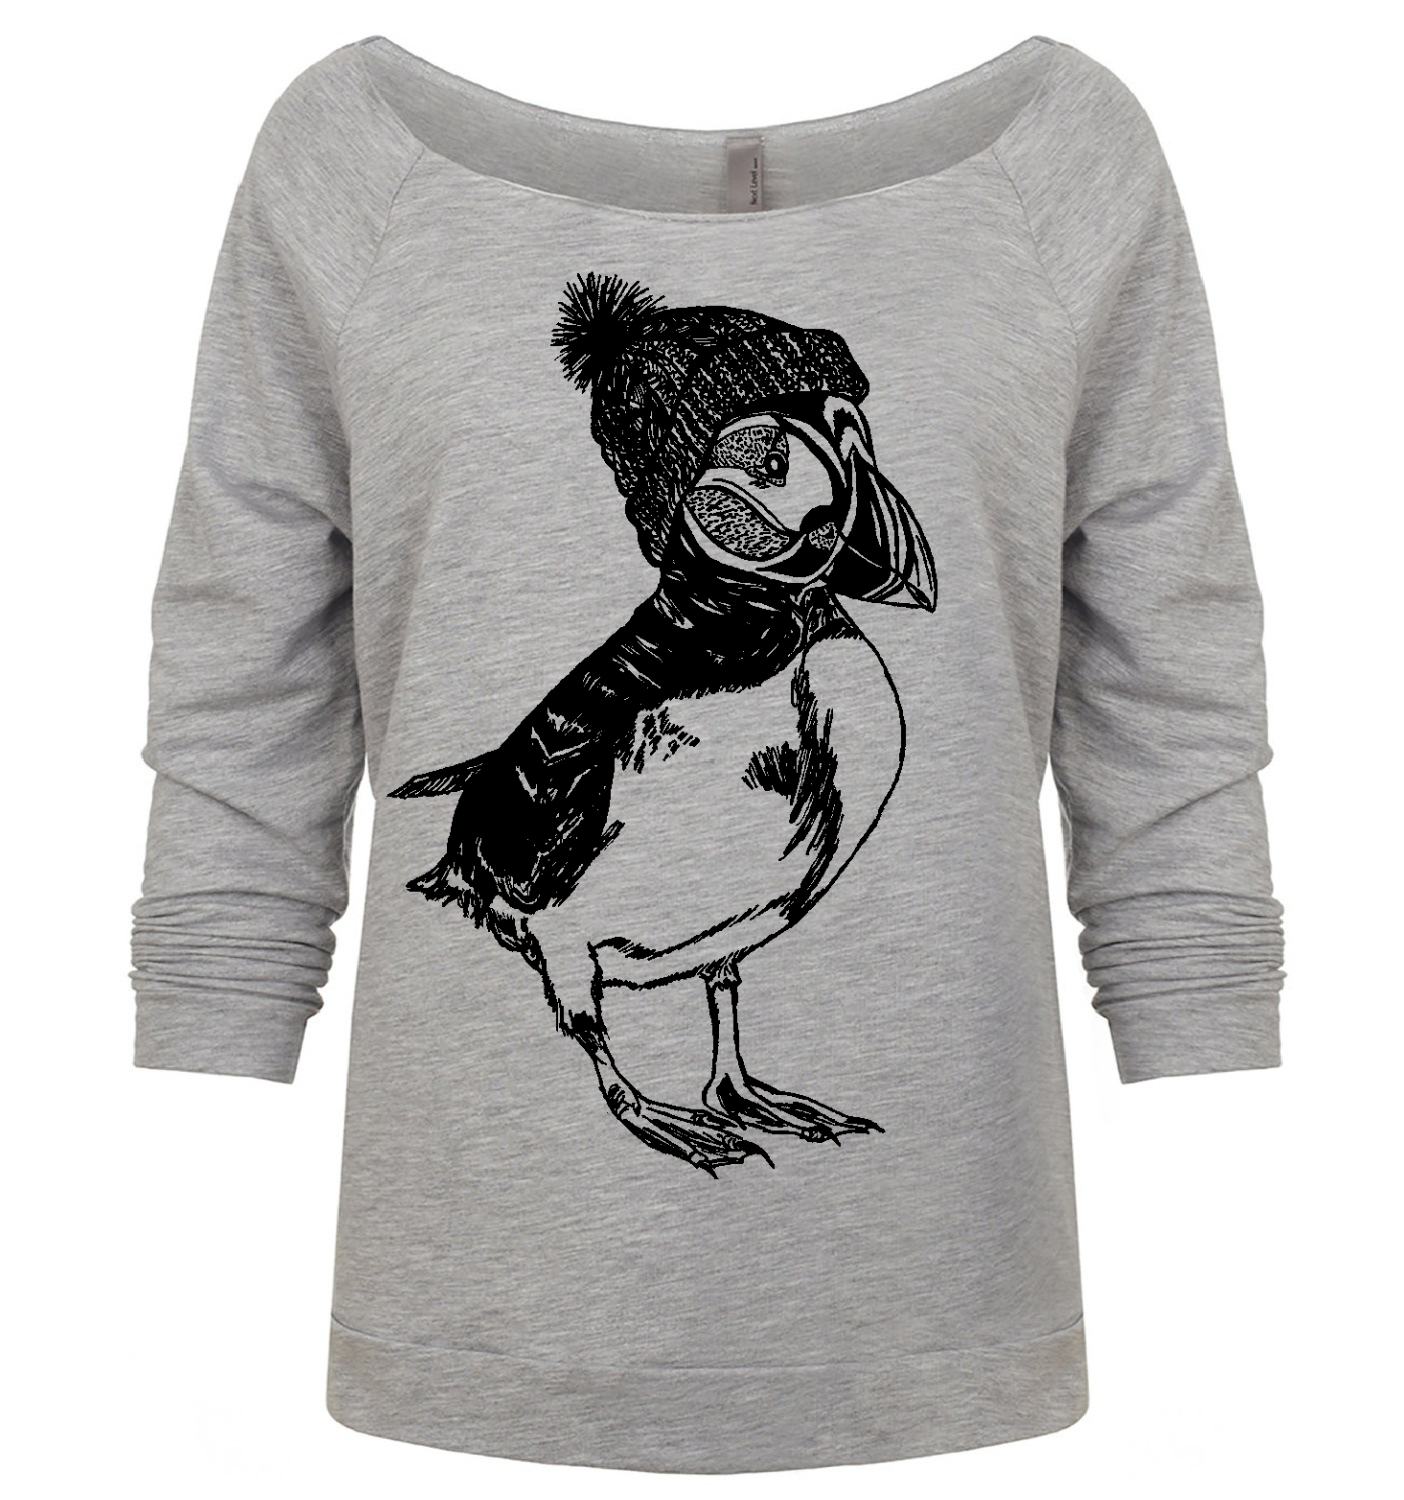 Puffin in a Pom Pom Hat Ladies 3/4 Sleeve Boatneck Shirt